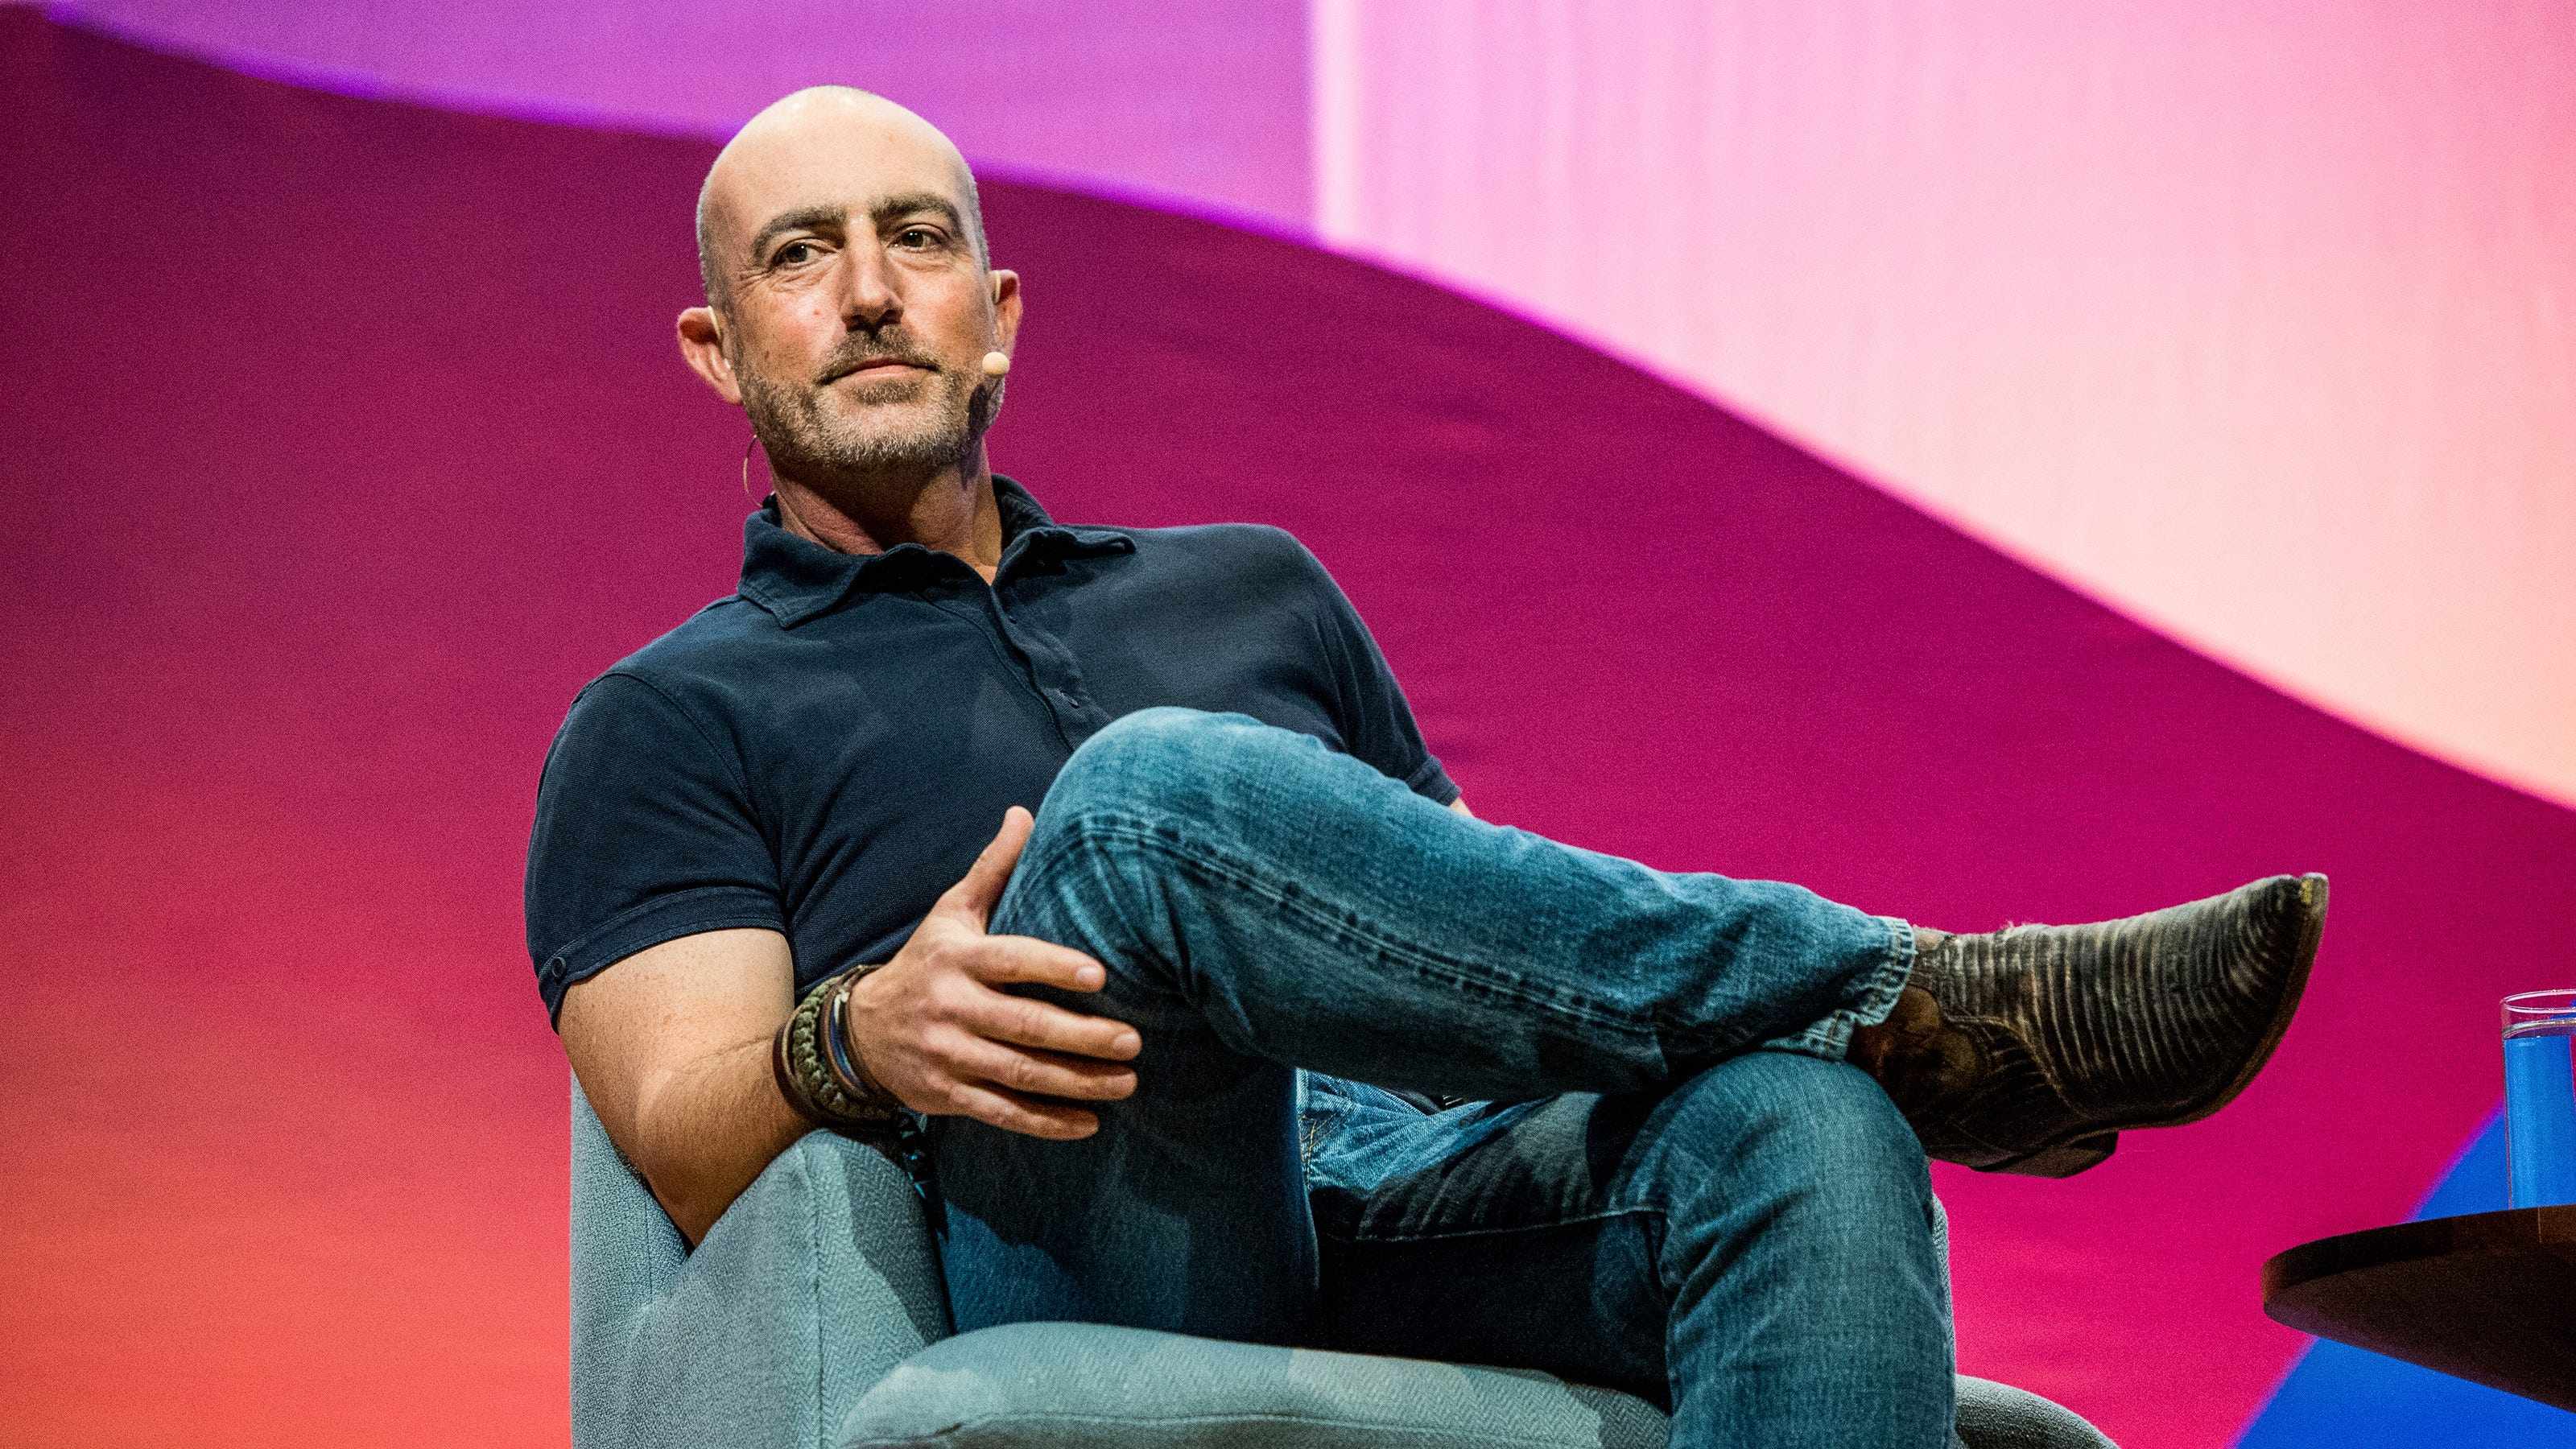 What do we know about Mark Bezos, Amazon founder Jeff Bezos’ younger brother? Photo: @tdevelopments/Twitter